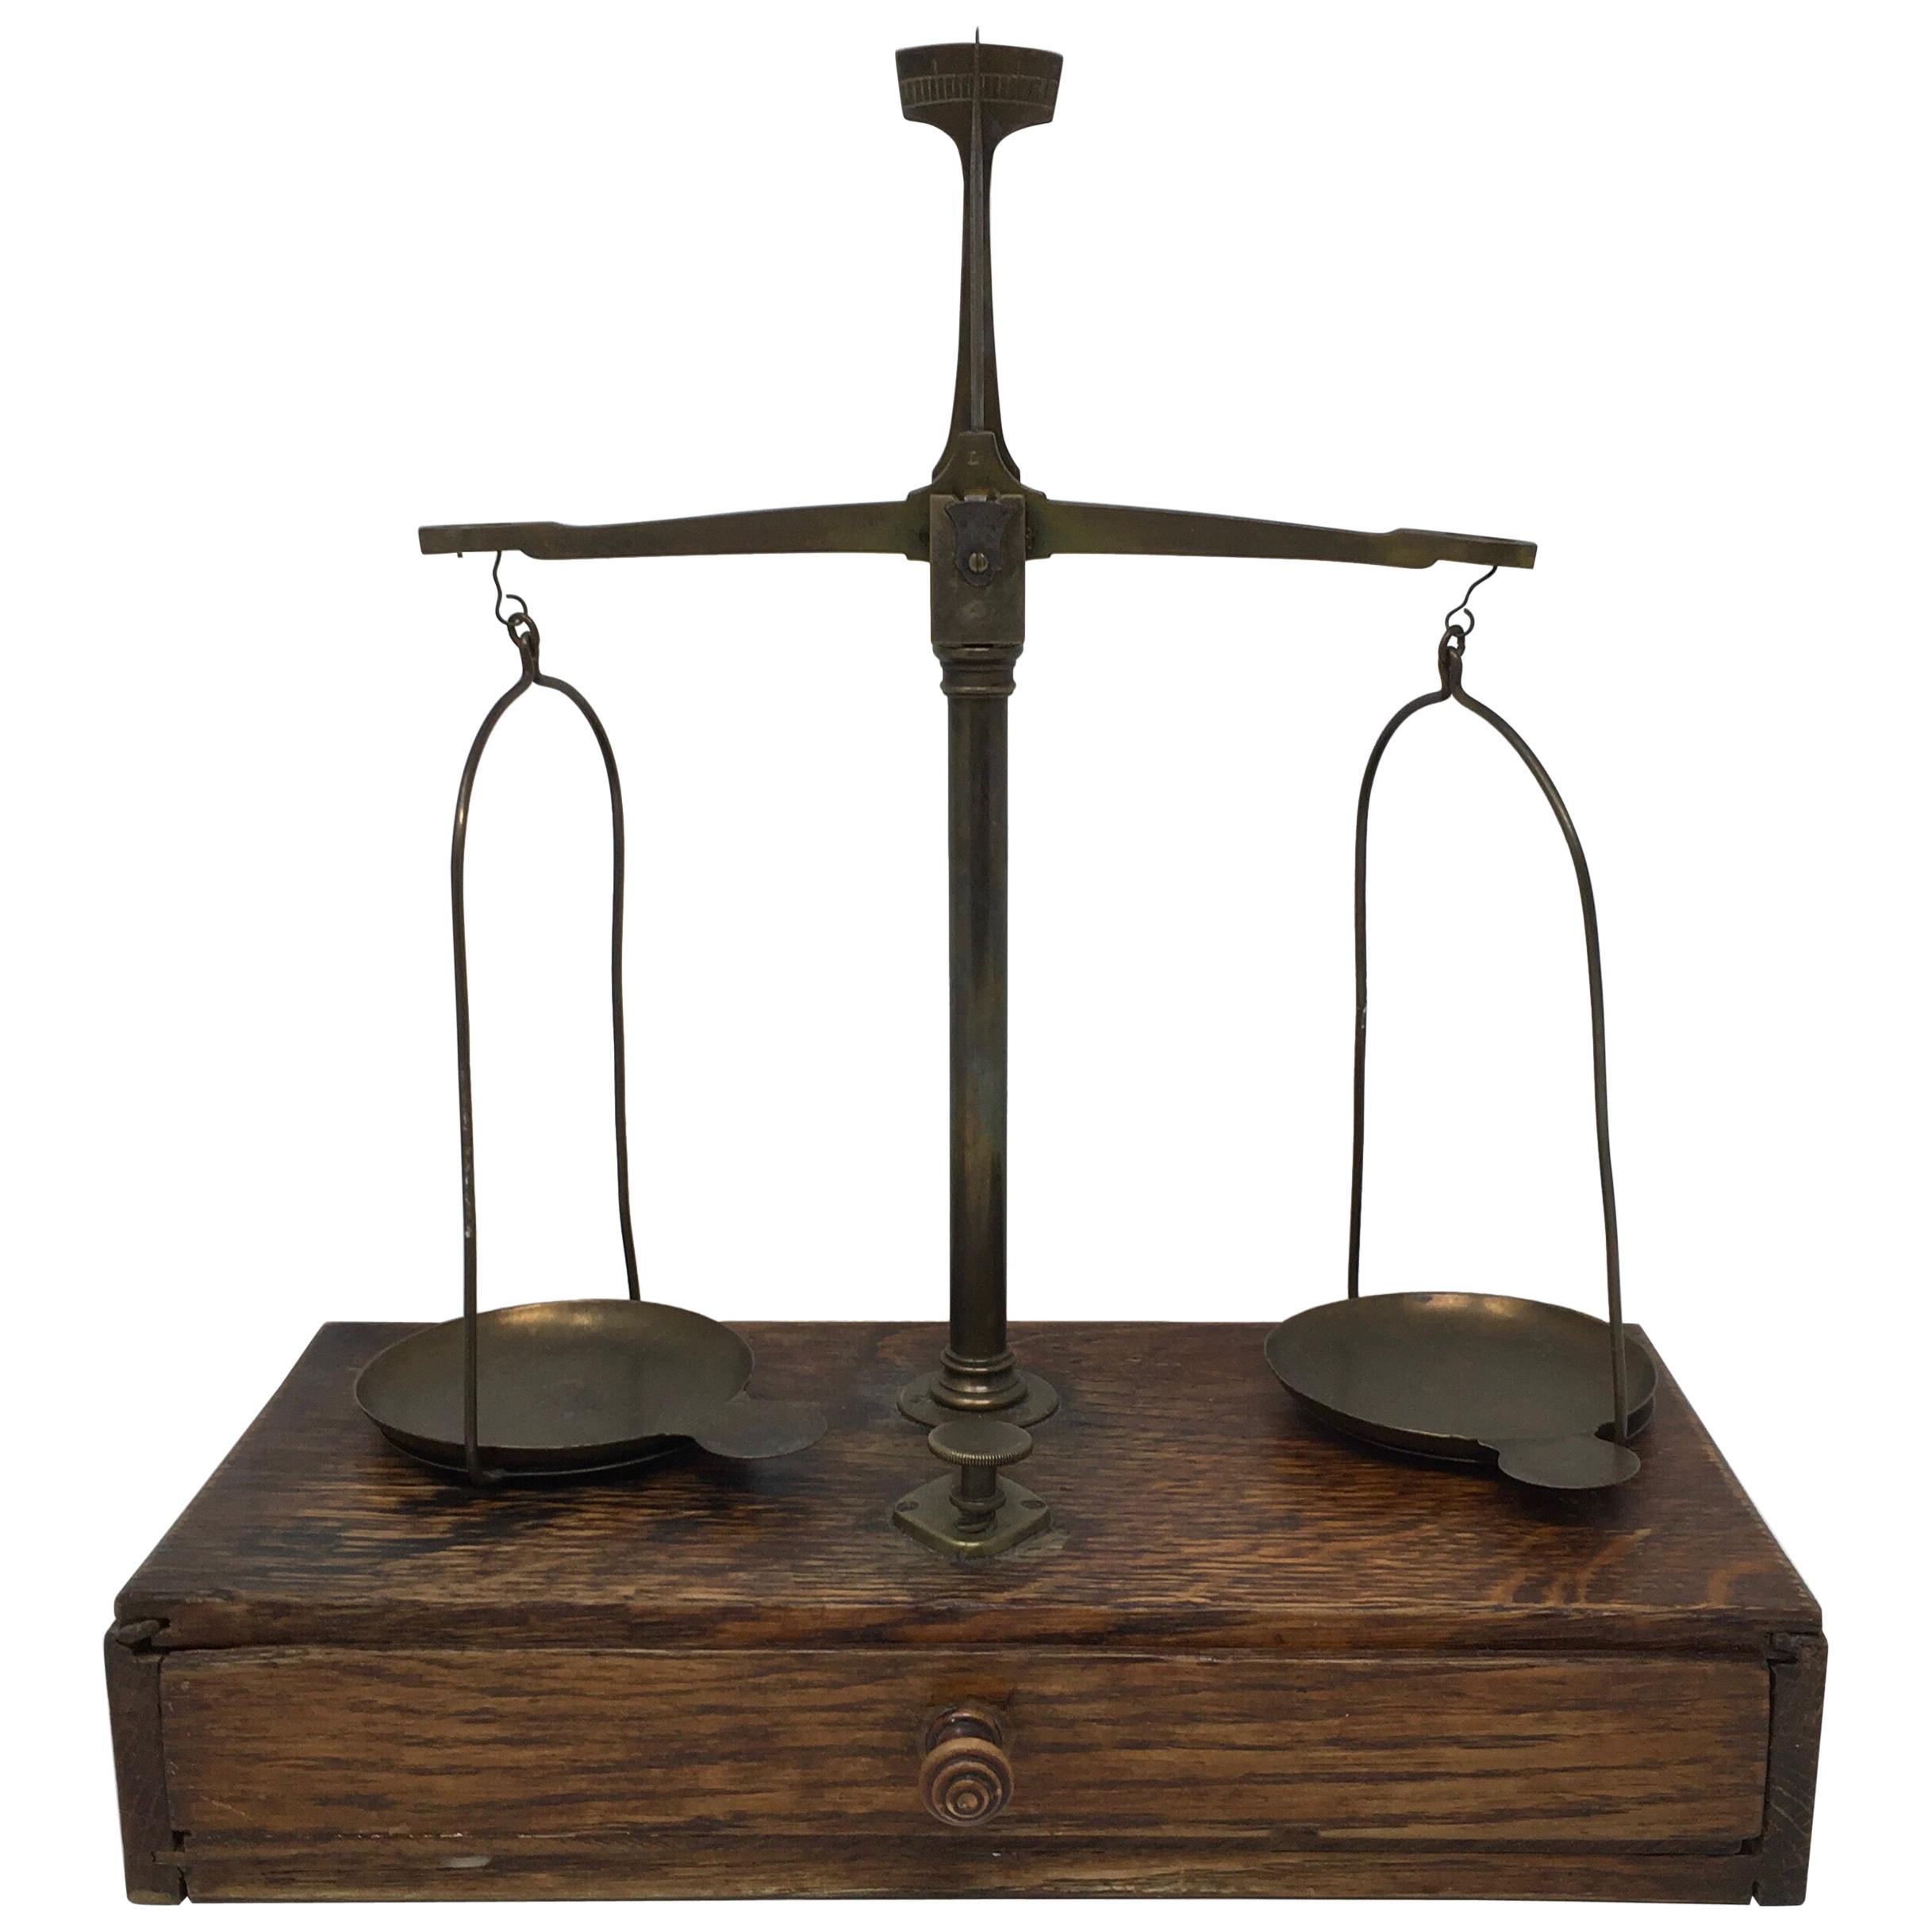 French Apothecary Brass Scales, circa 1800s